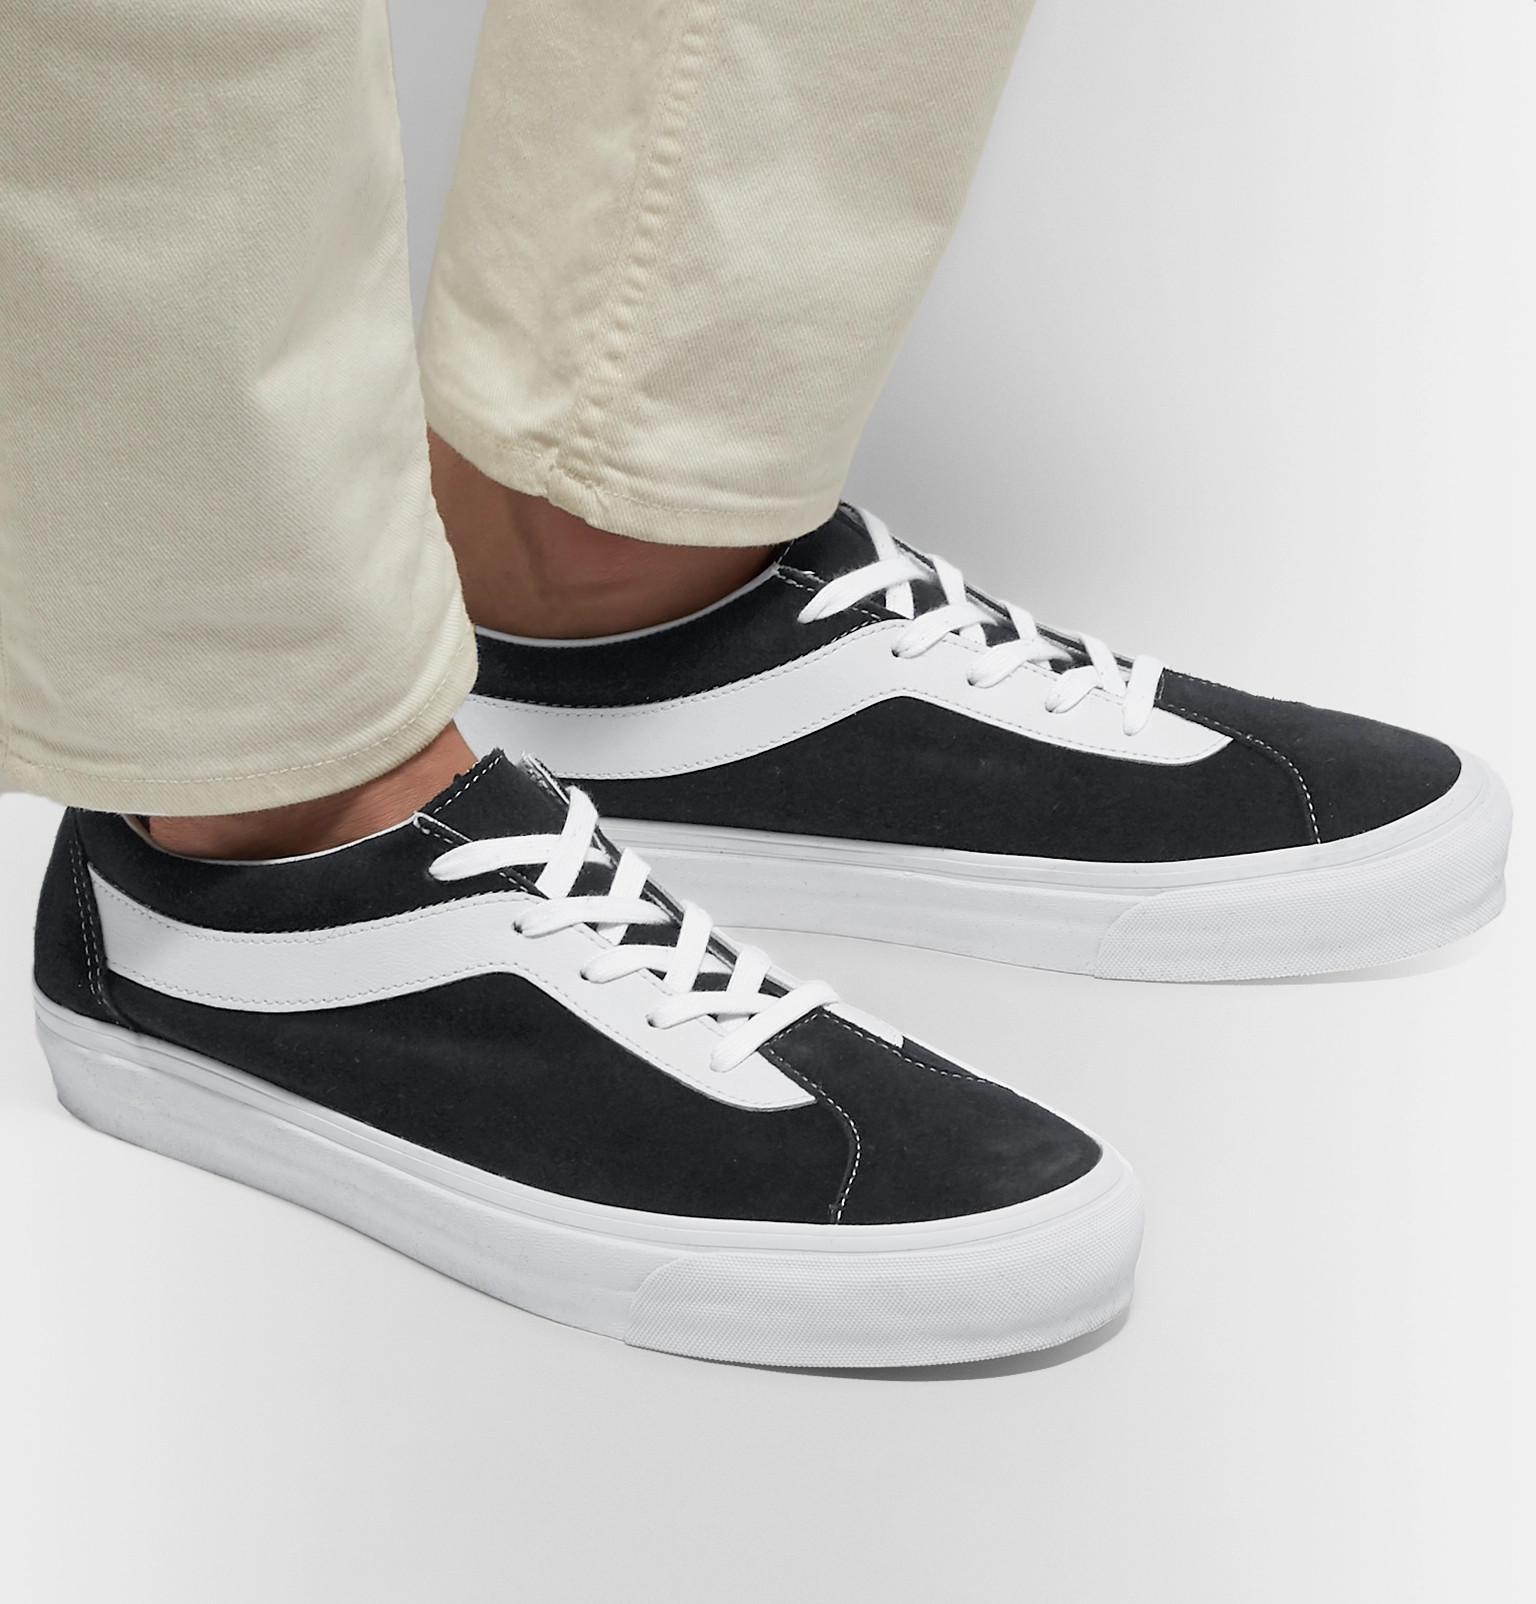 Vans Staple Bold Ni Suede And Leather Sneakers in Black for Men - Lyst